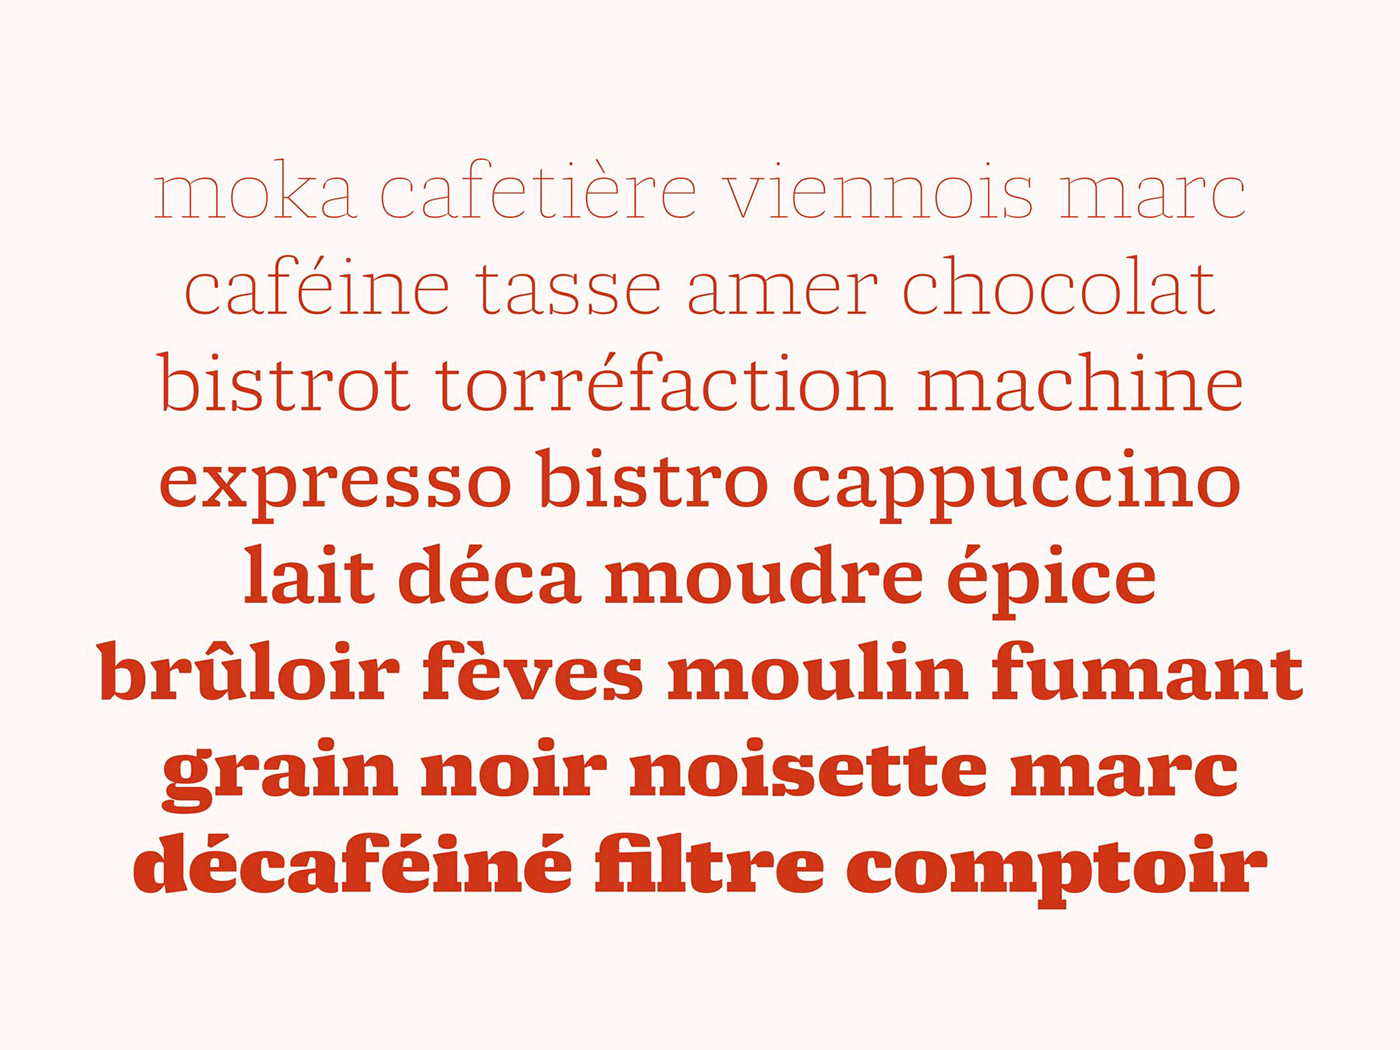 molto typetogether Xavier Dupré slab serif hairline Fat display Swashes Typeface